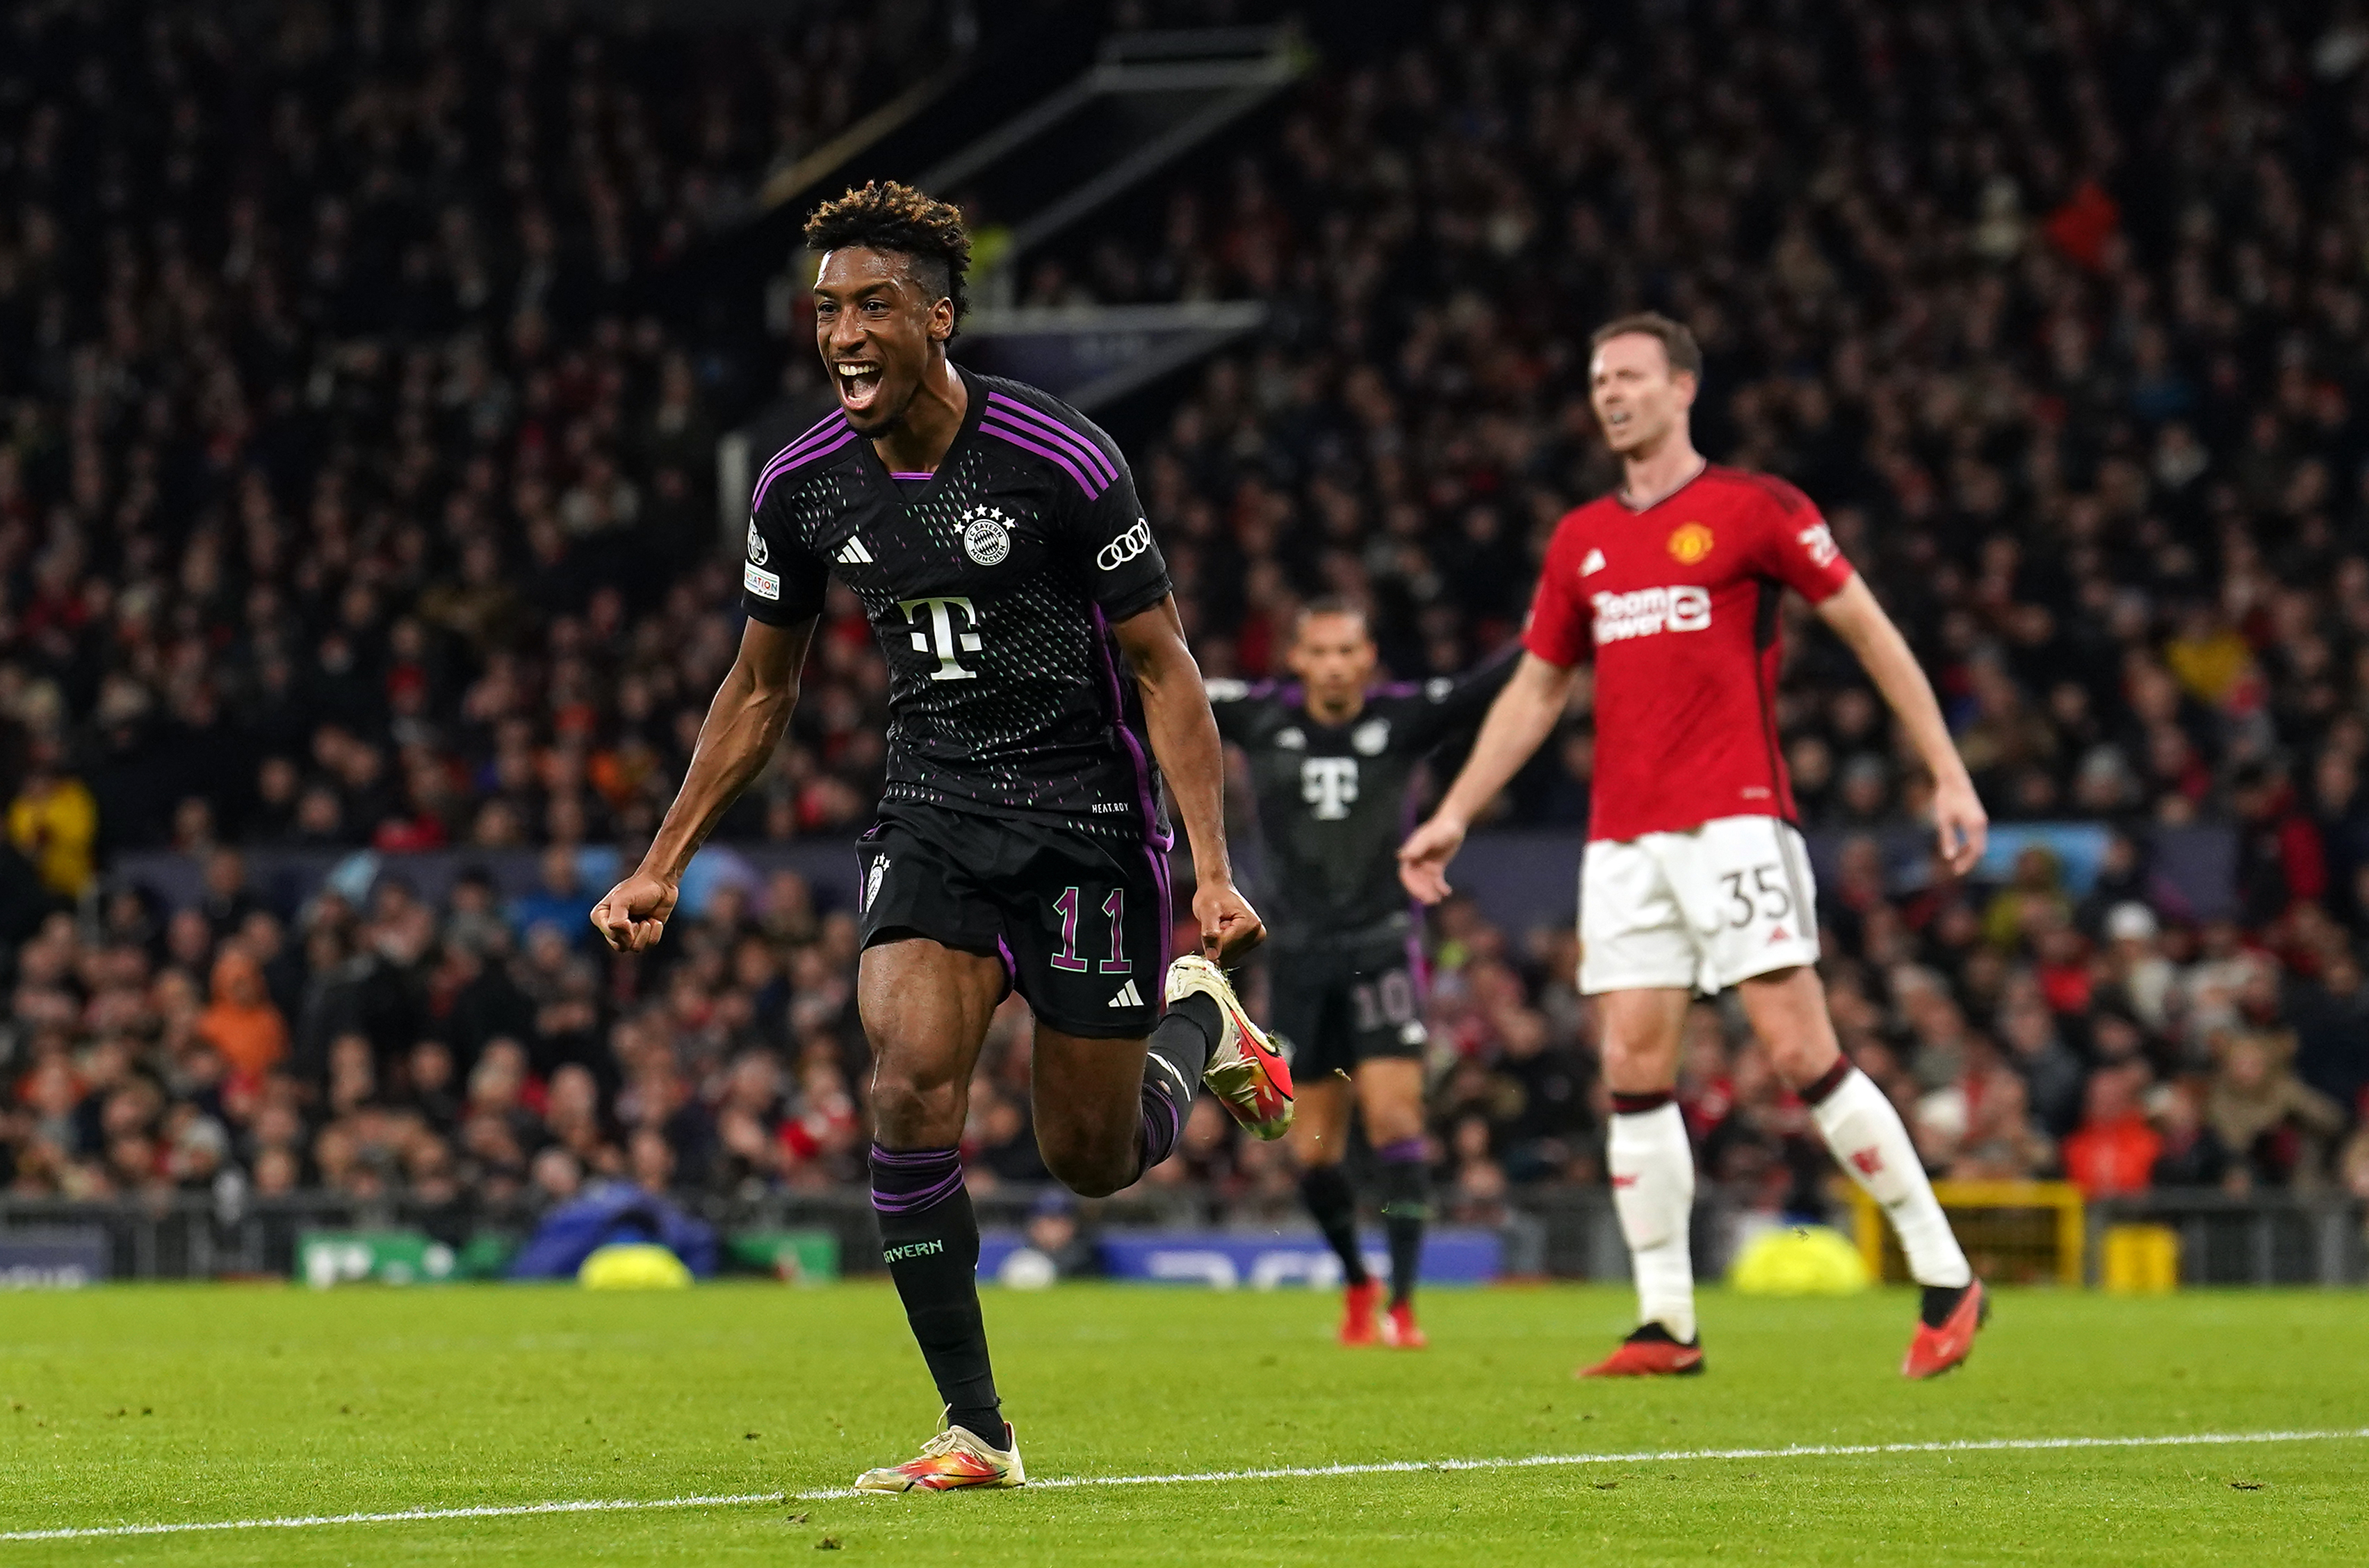 Kingsley Coman celebrates what proved to be Bayern Munich's winner at Old Trafford